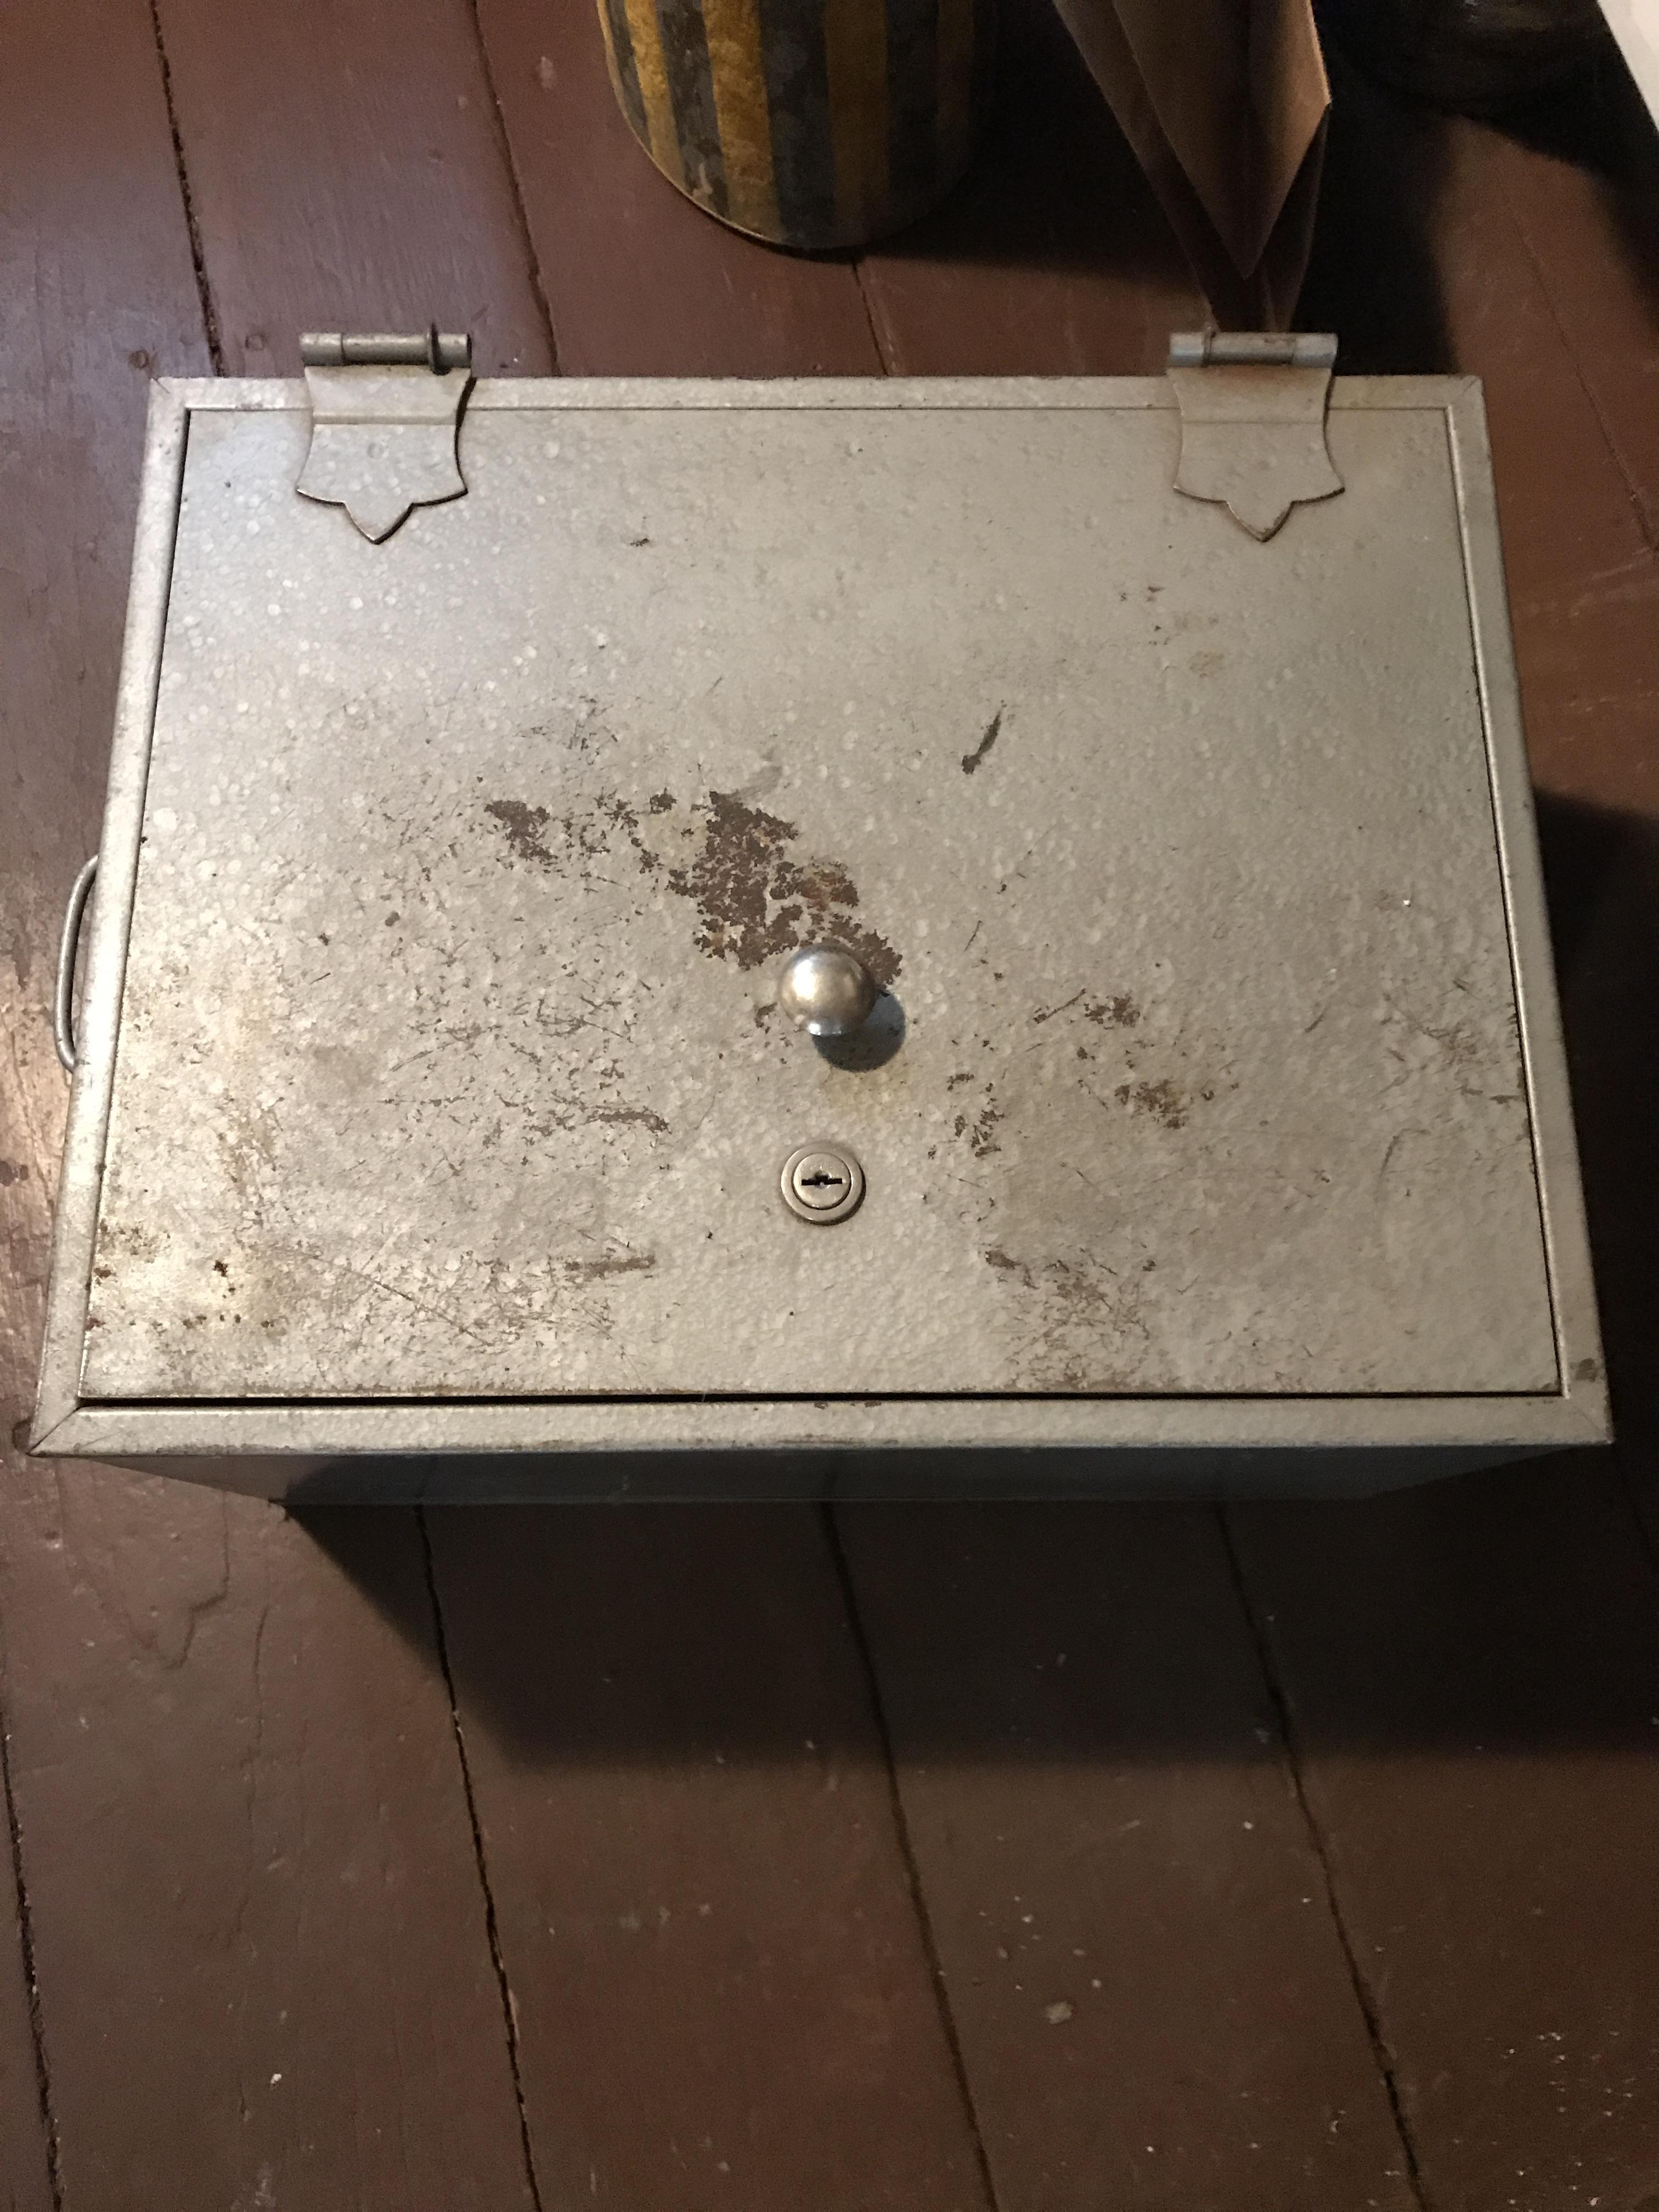 "Found an old lock box in my grandmas house. House has been sitting mostly vacant for about 10 years as we just kept it open for family friends to use when visiting."